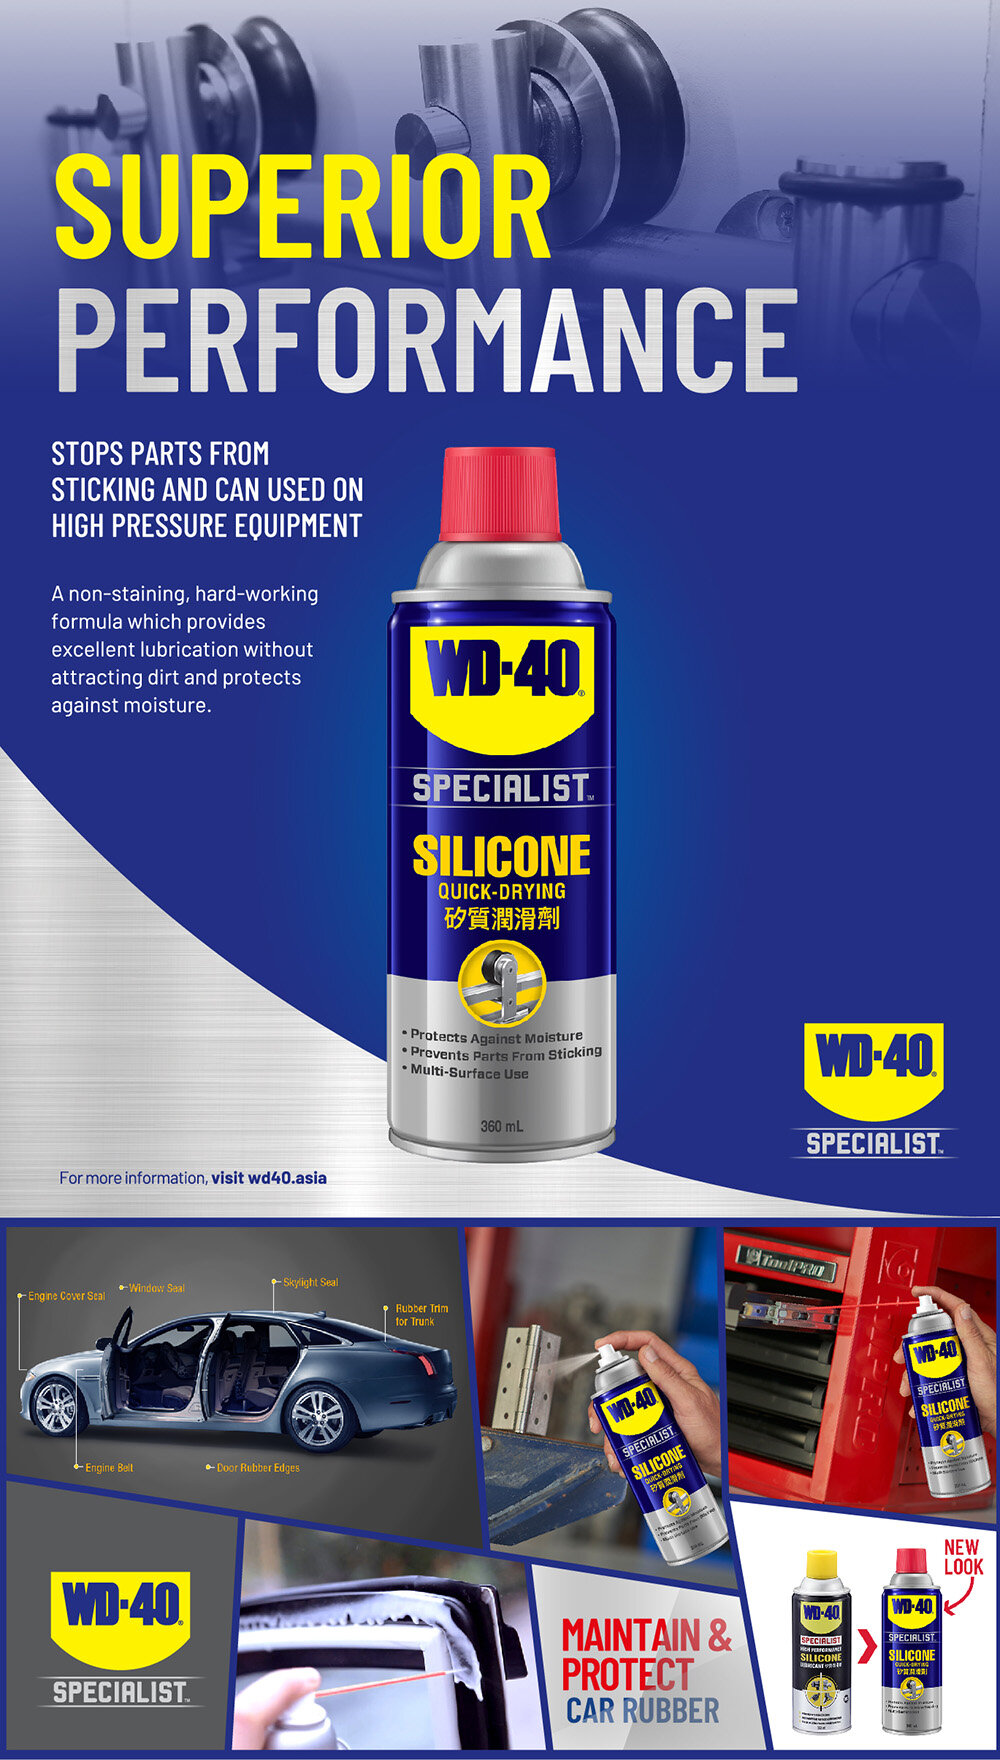 How To Protect Your Vehicles Rubber Seals - WD-40 Specialist